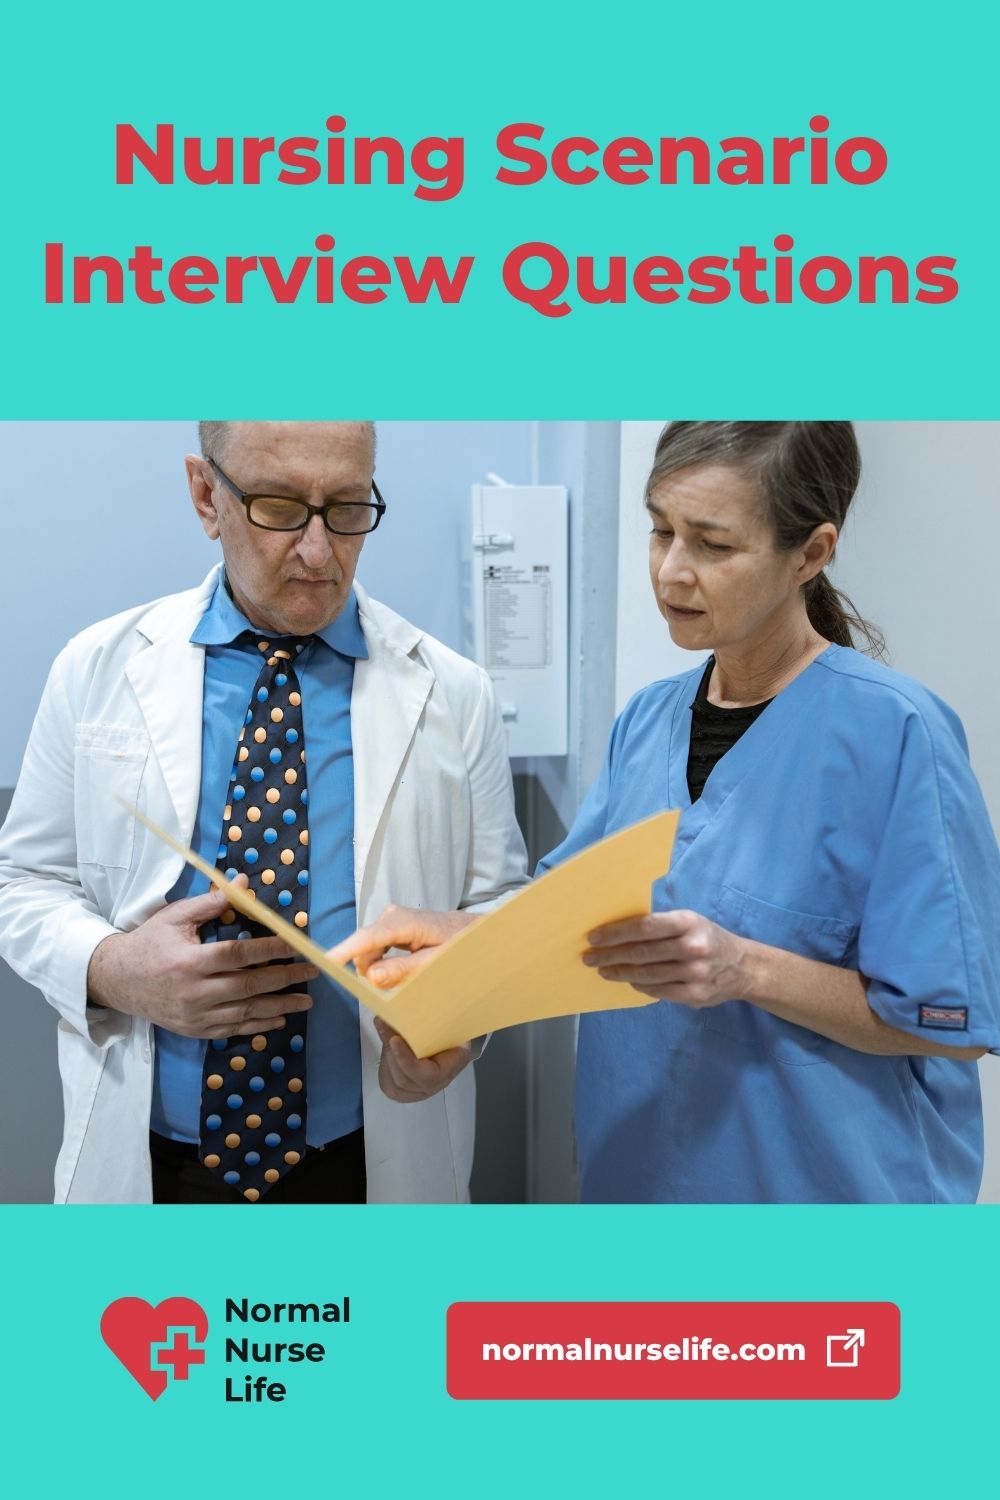 Nursing scenario interview questions and answers examples